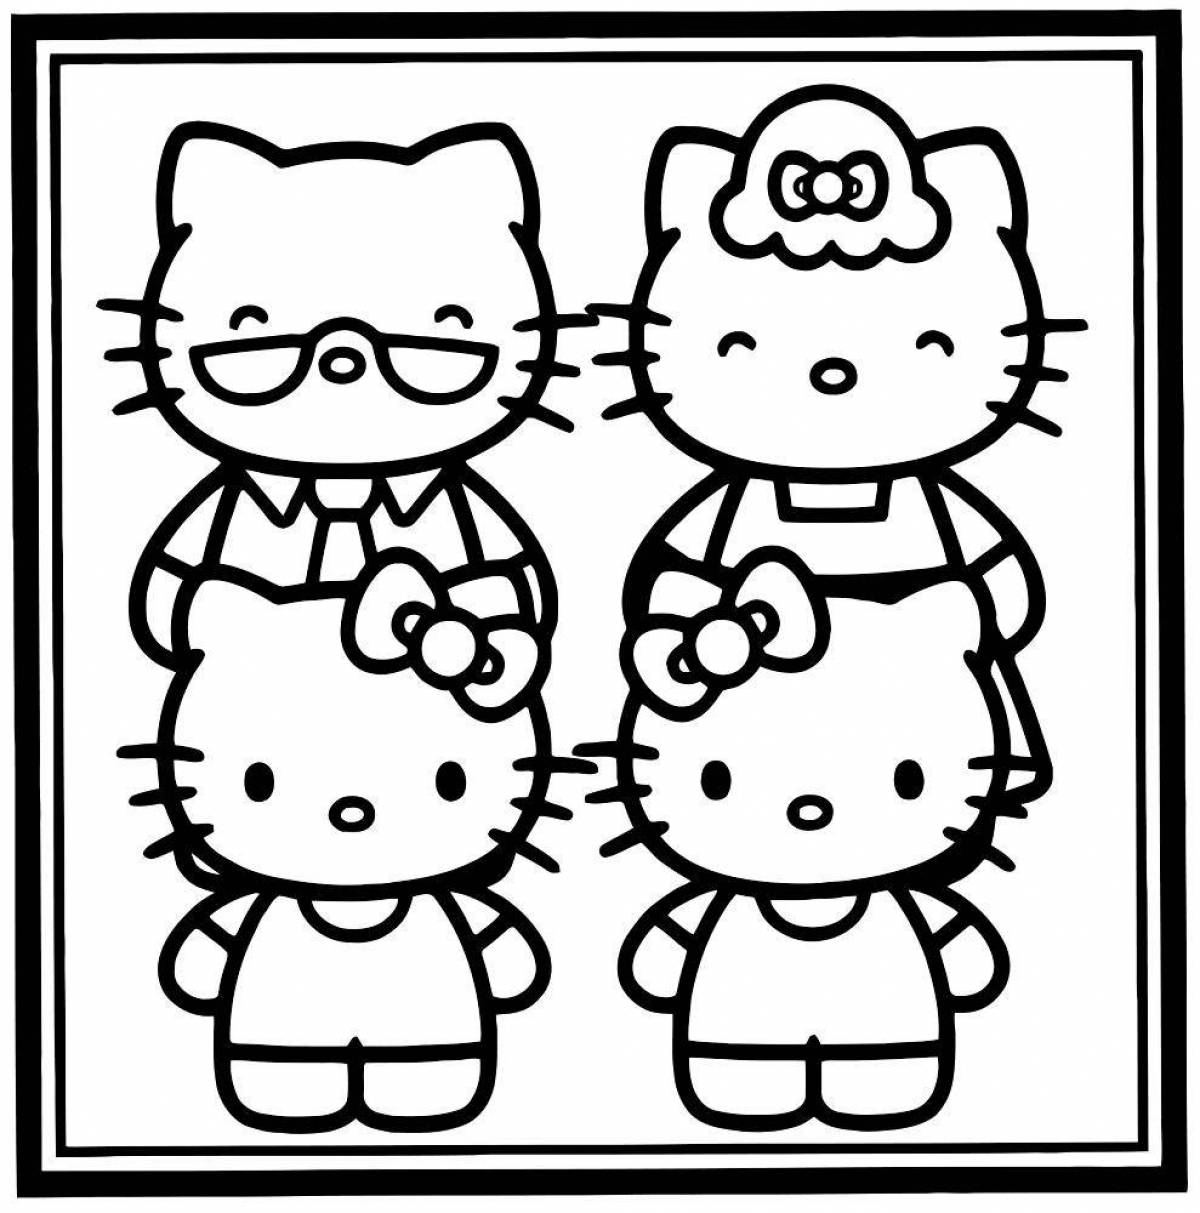 Coloring pages of friends - lively